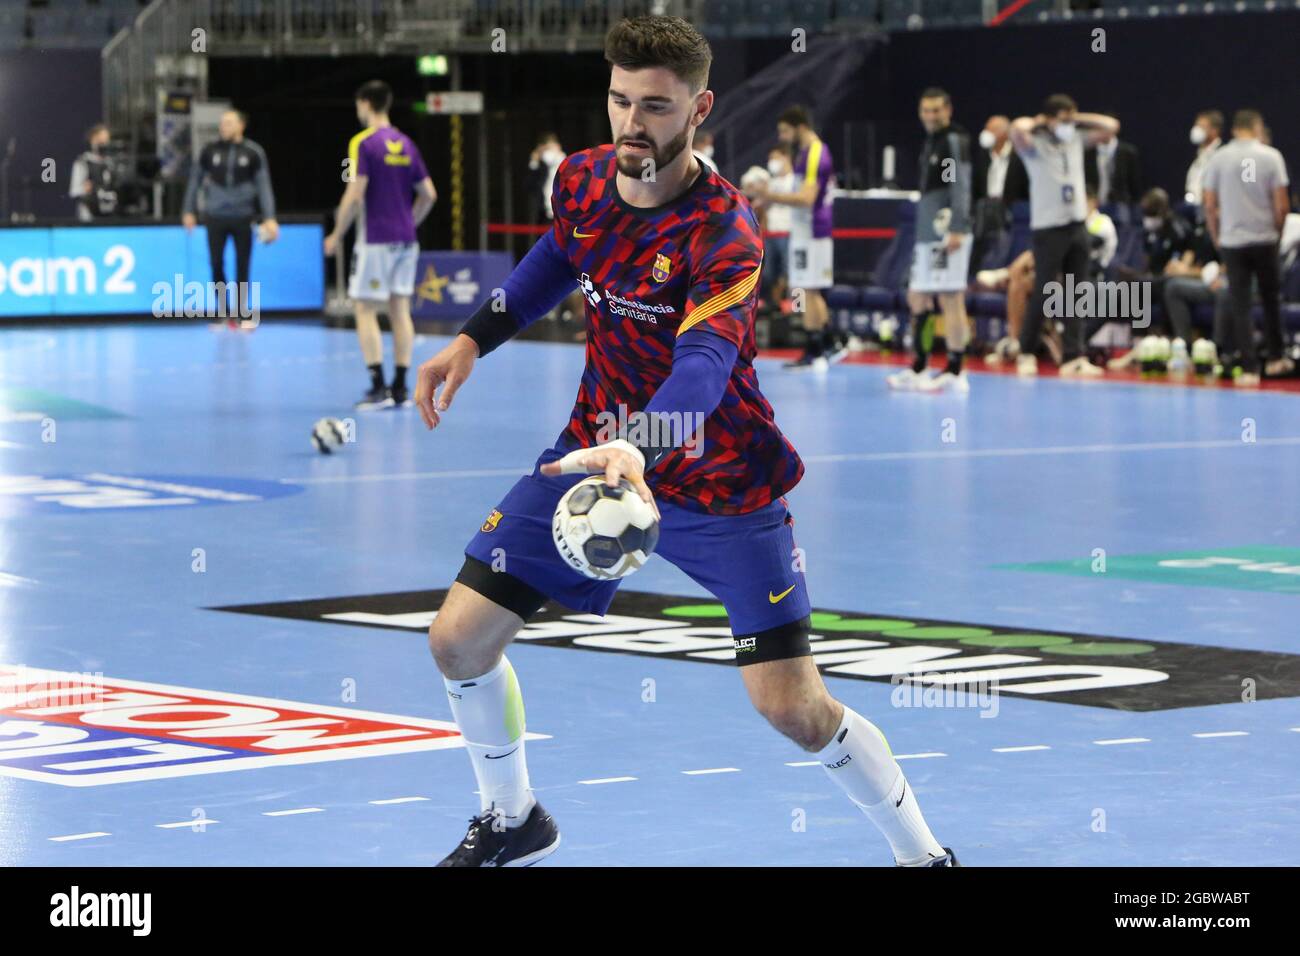 Ludovic Fabergas of FC Barcelone during the EHF Champions League Final4  Handball match between FC Barcelona